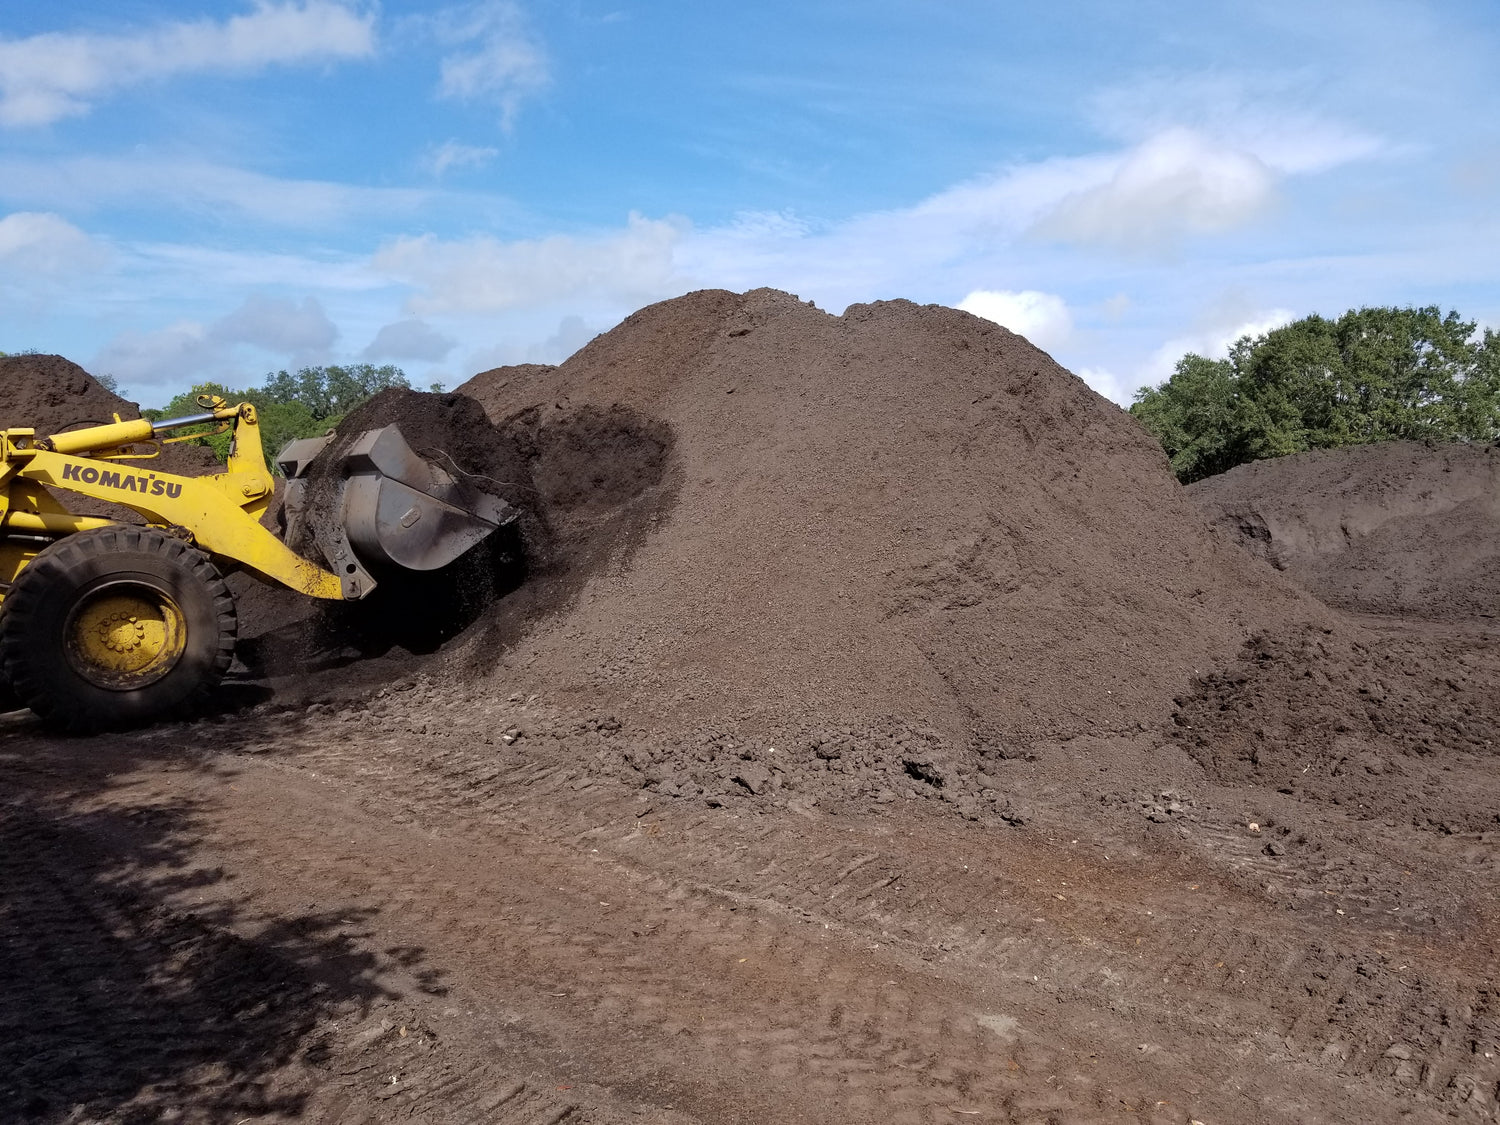 Buy piles of landscape materials and machine scooping up landscaping soil.